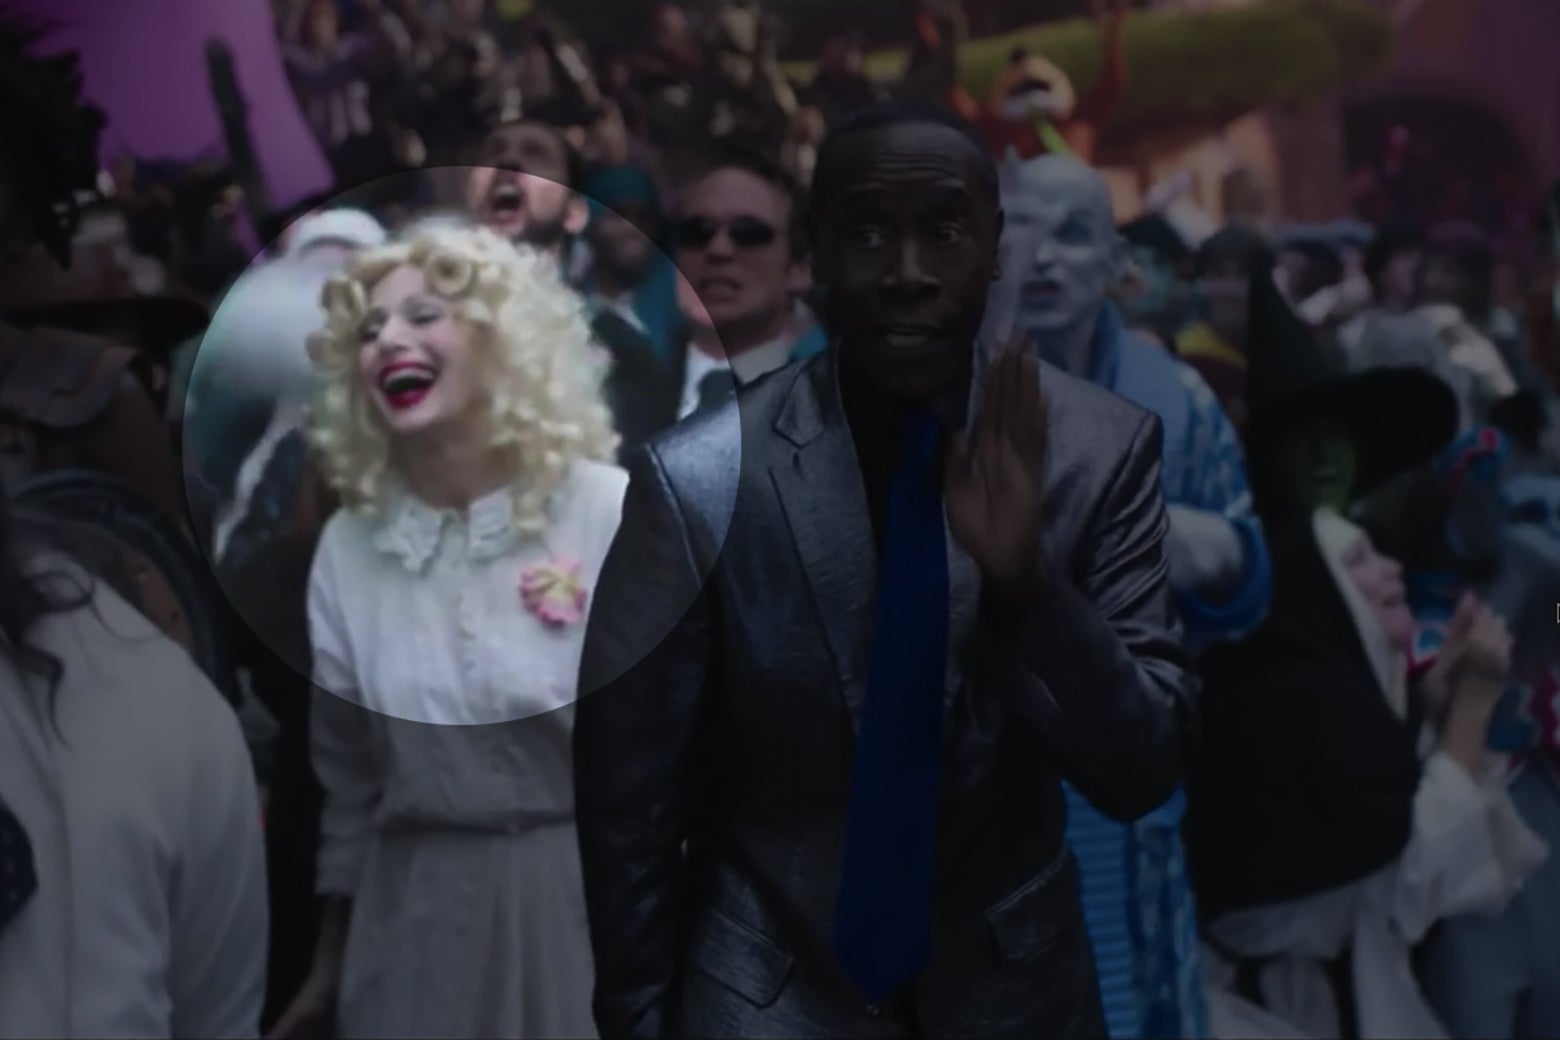 A still from Space Jam showing Baby Jane Hudson cheering on a basketball game from the sidelines.